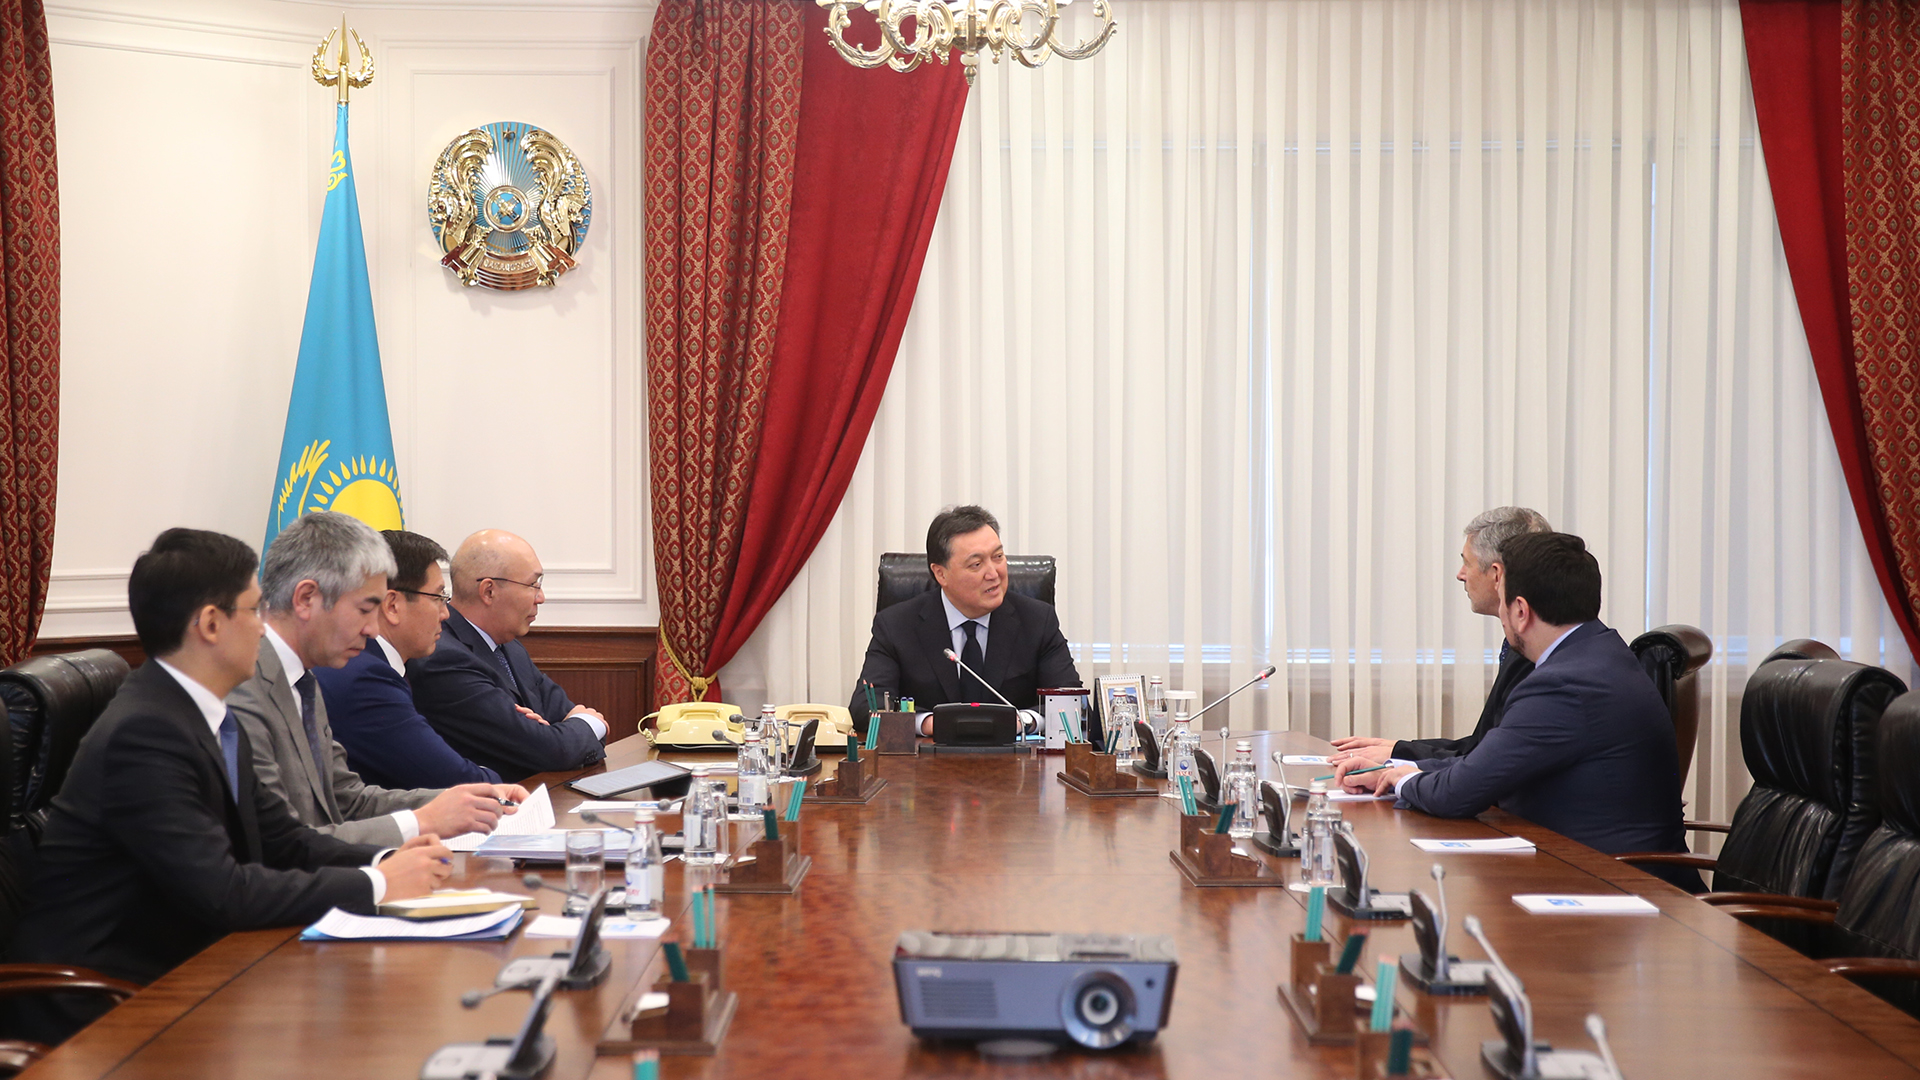 Head of Government discusses development of satellite Internet in Kazakhstan with management of One Web